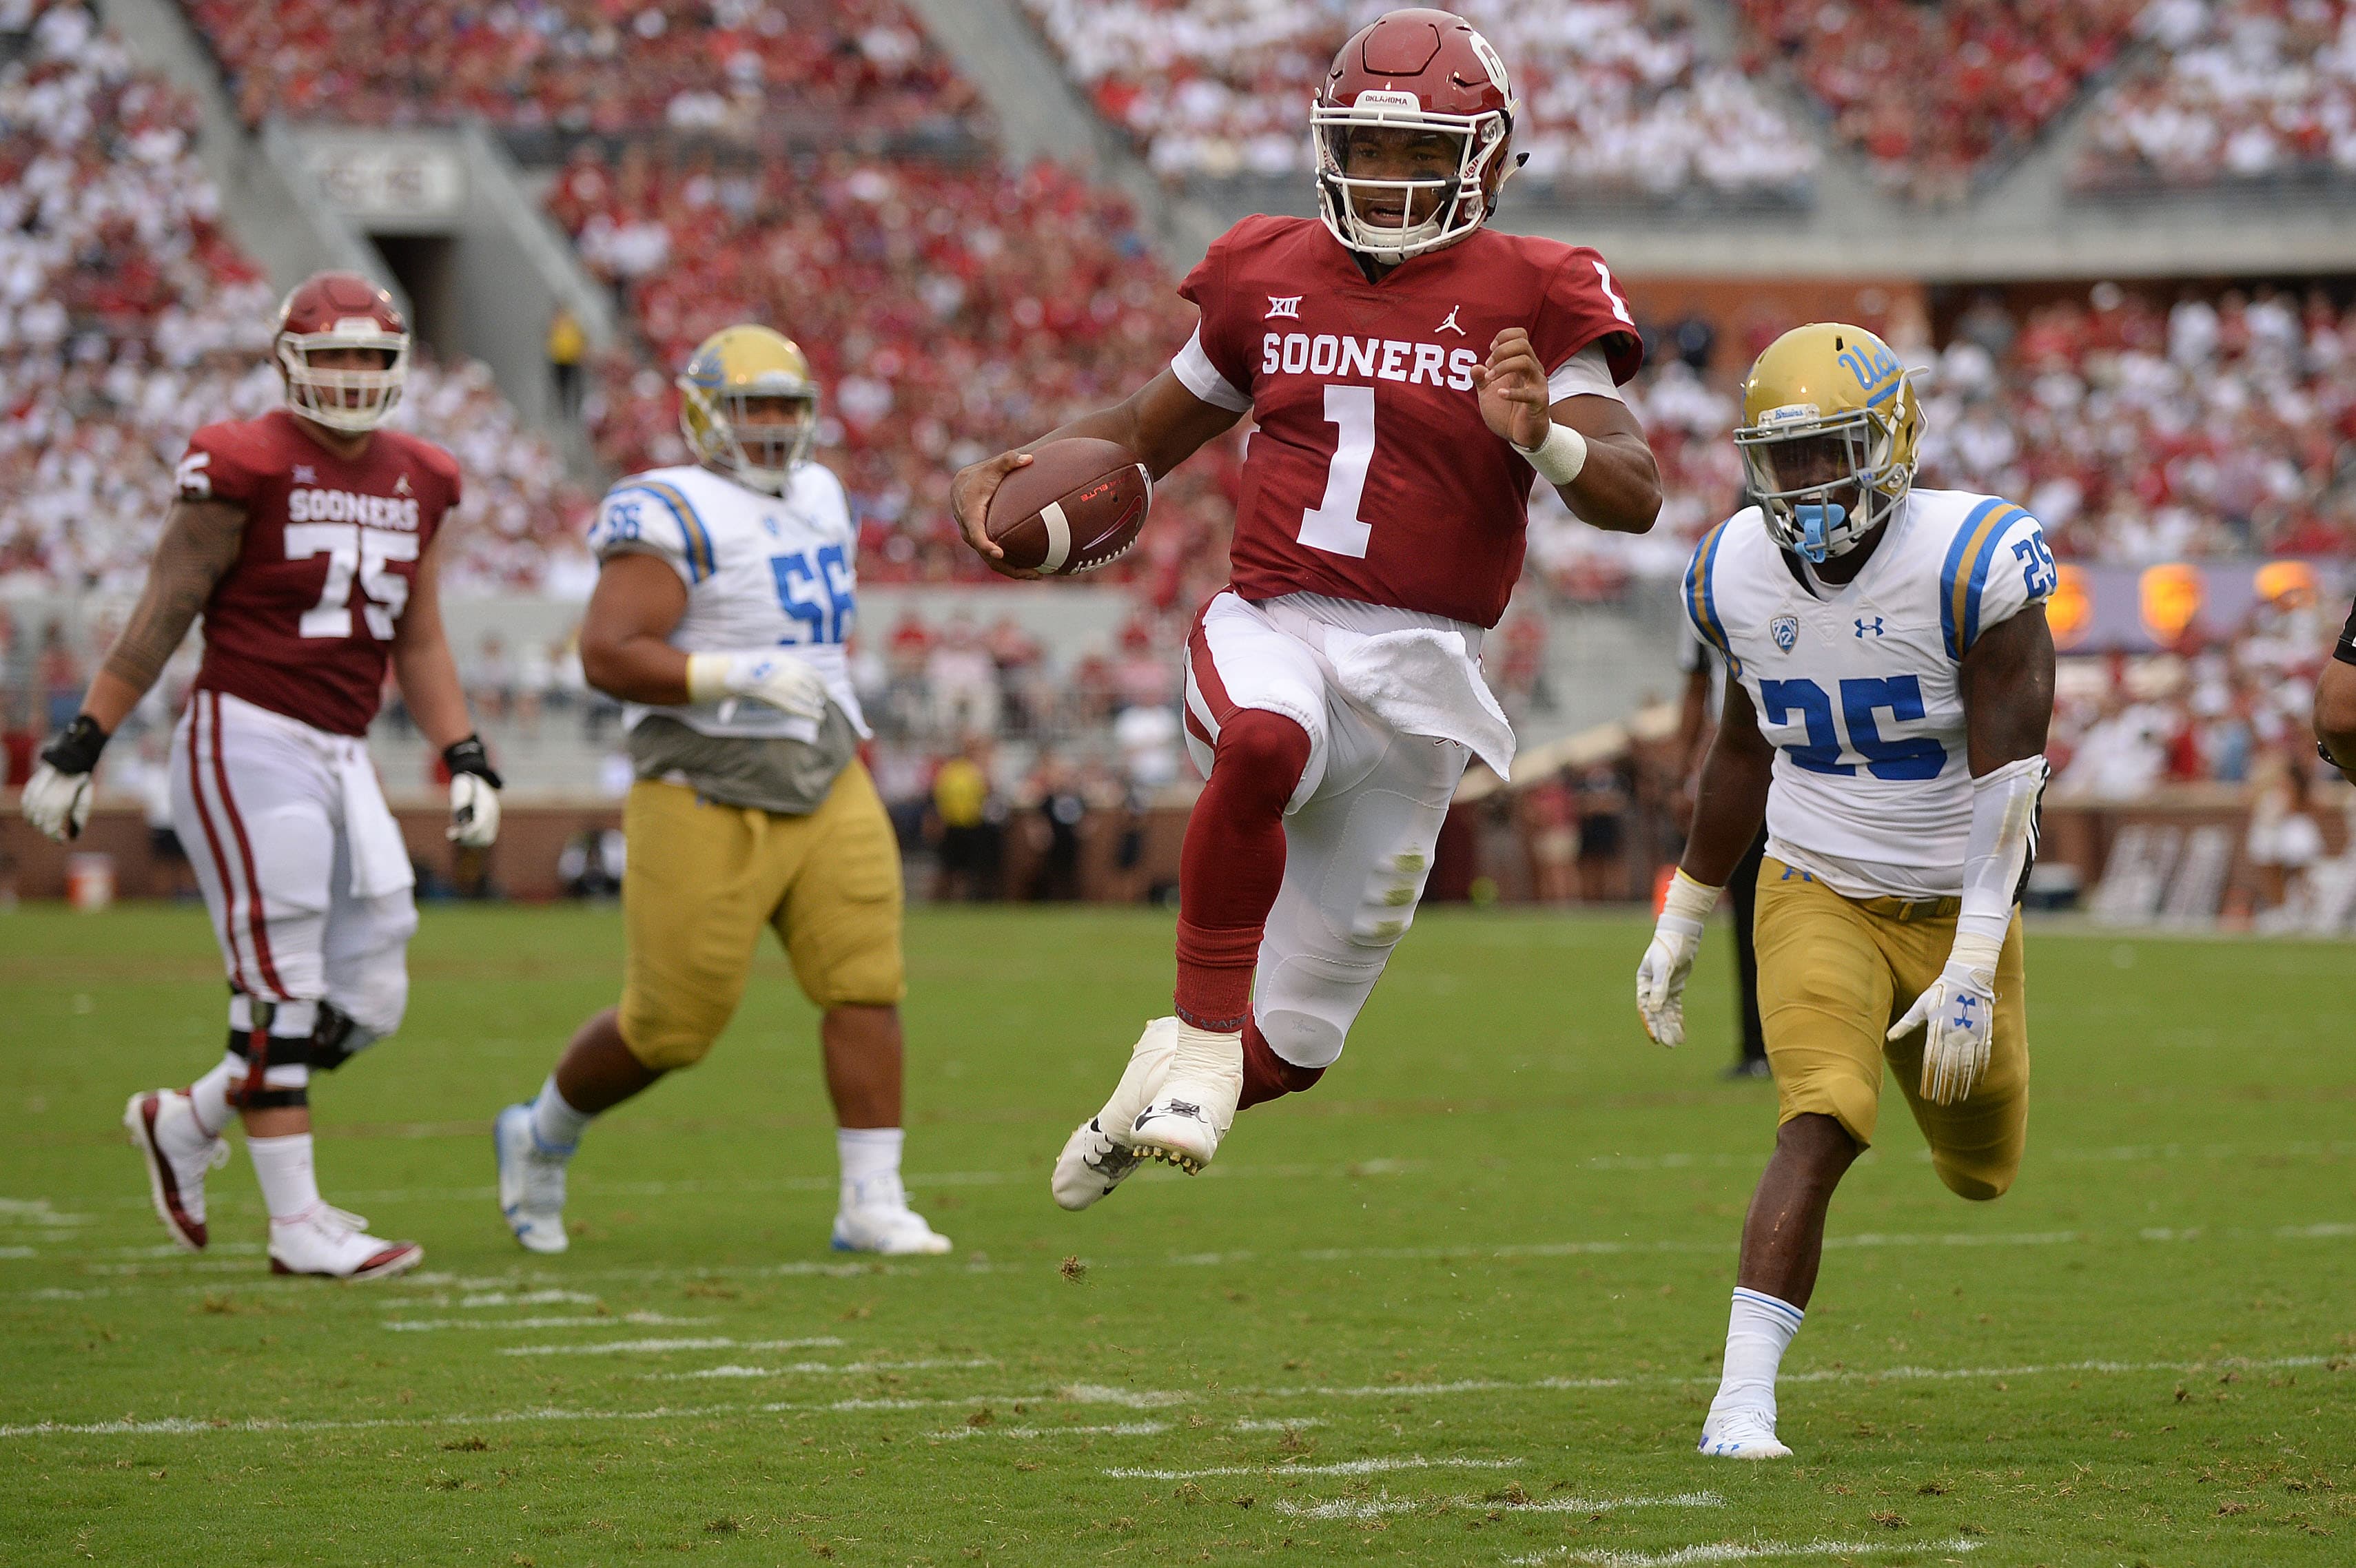 We looked at how hard it is to replace a Heisman winner. Kyler